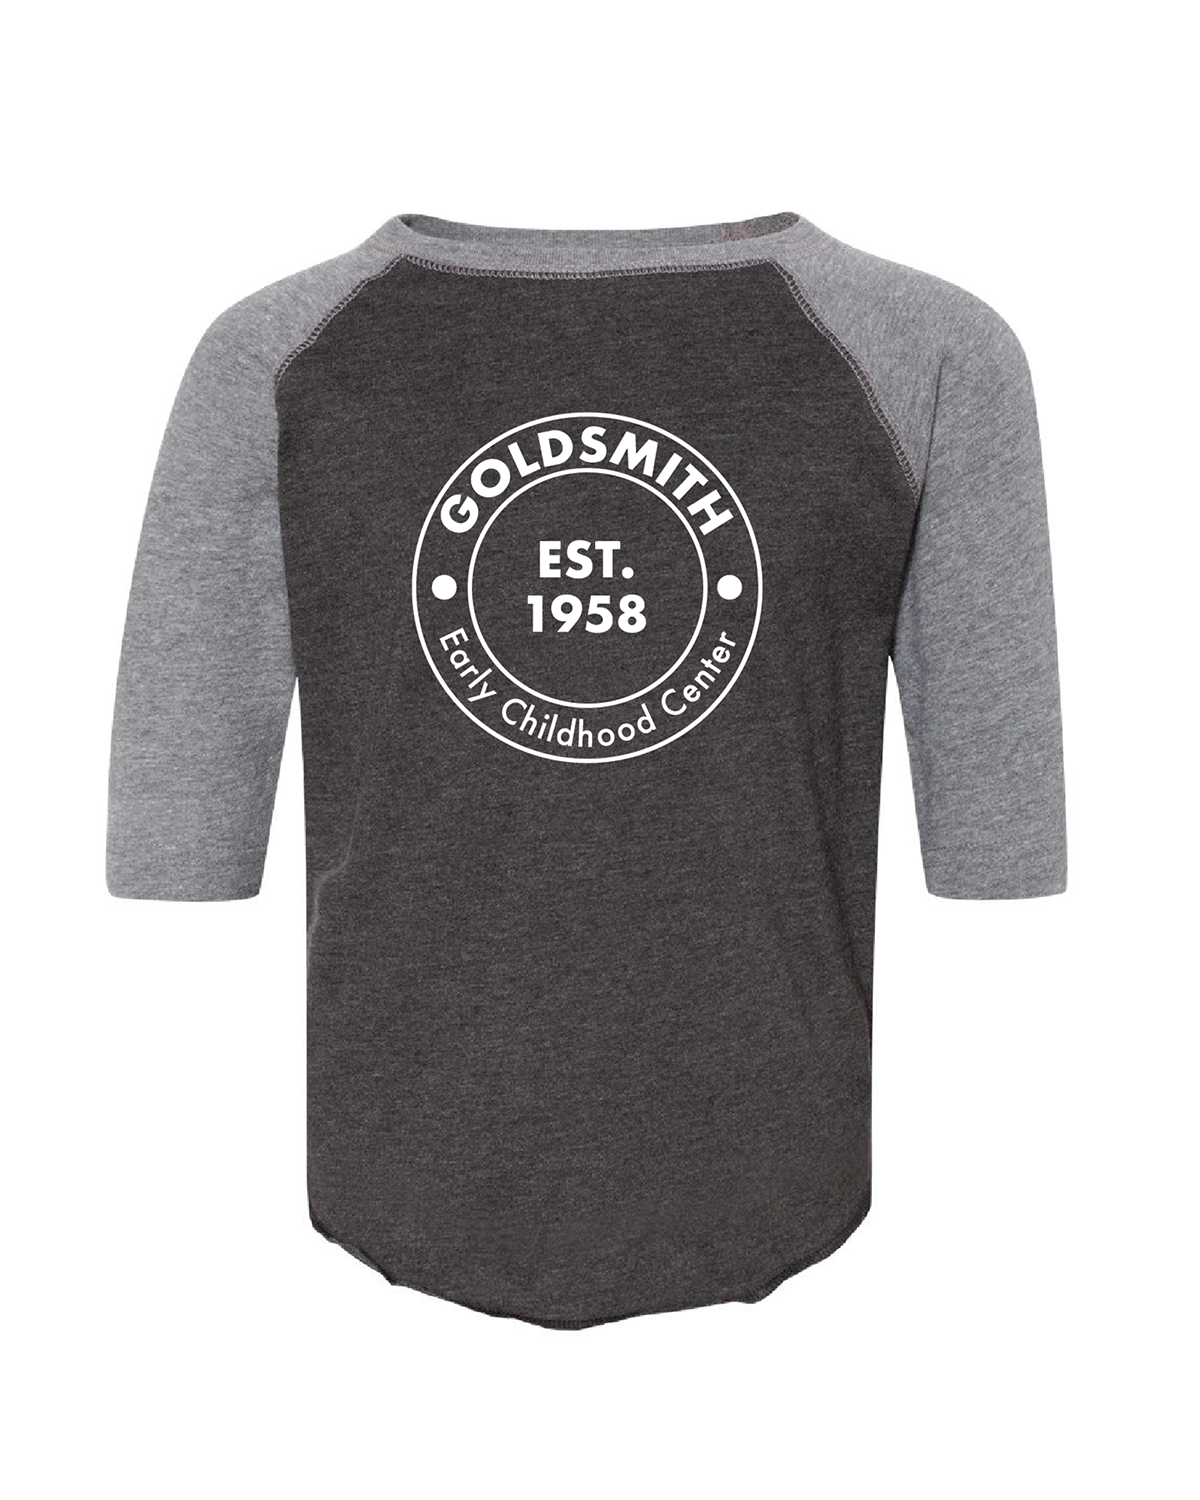 Youth Baseball Tee (Cotton Fine Jersey) with Round Logo